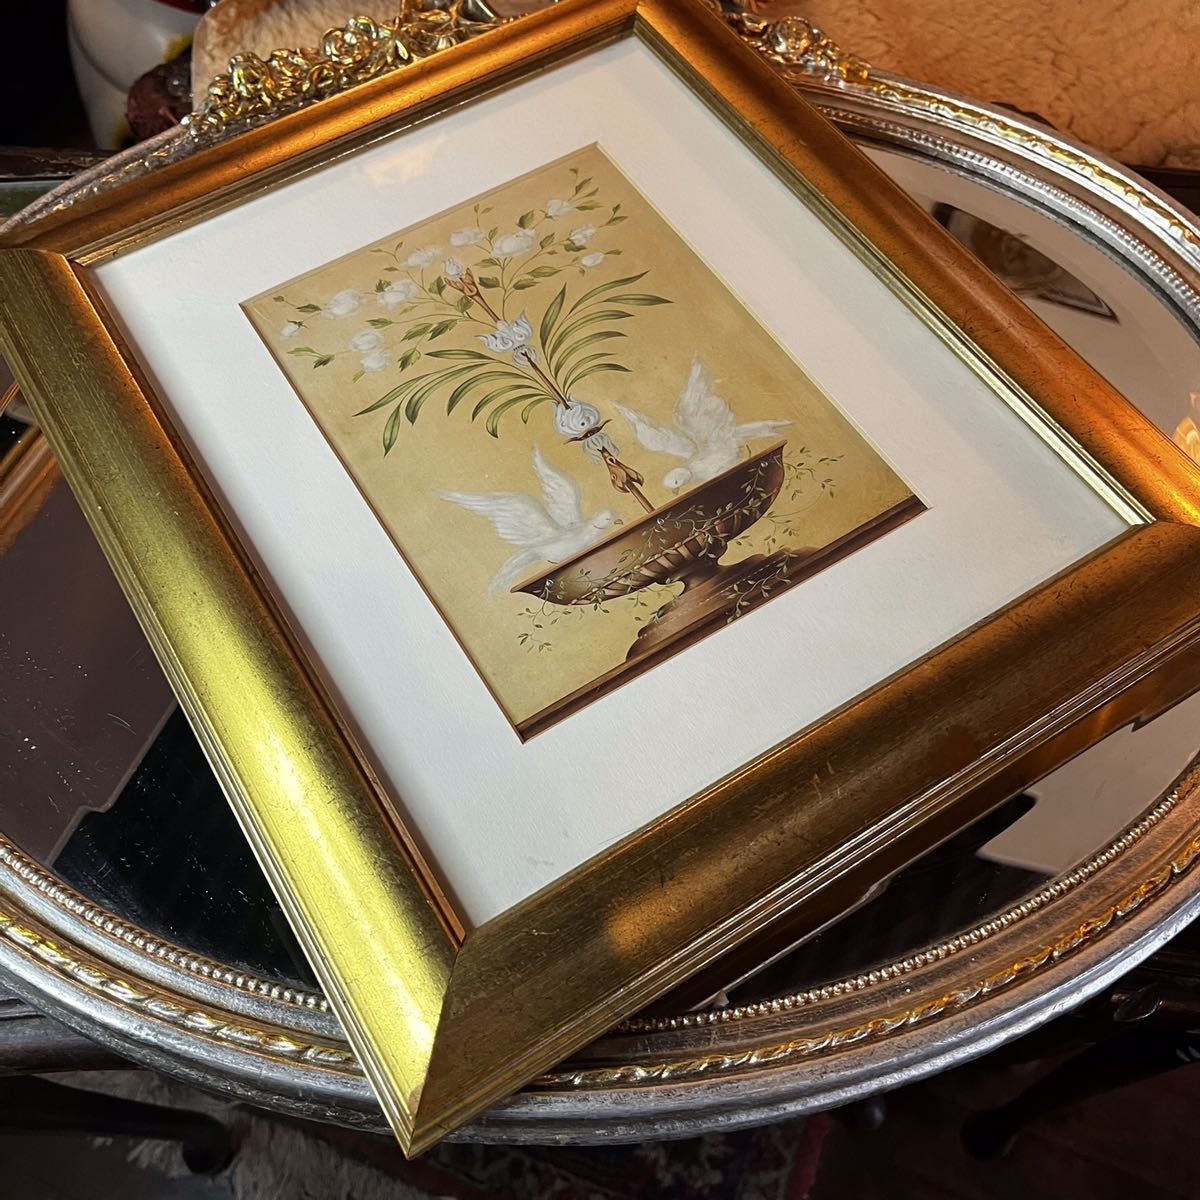 Yufuin Antique Made in Italy Painting Wooden Gold Frame Small Bird Playing in Water Size H 36W31 D, kitchen, tableware, storage, kitchen miscellaneous goods, can